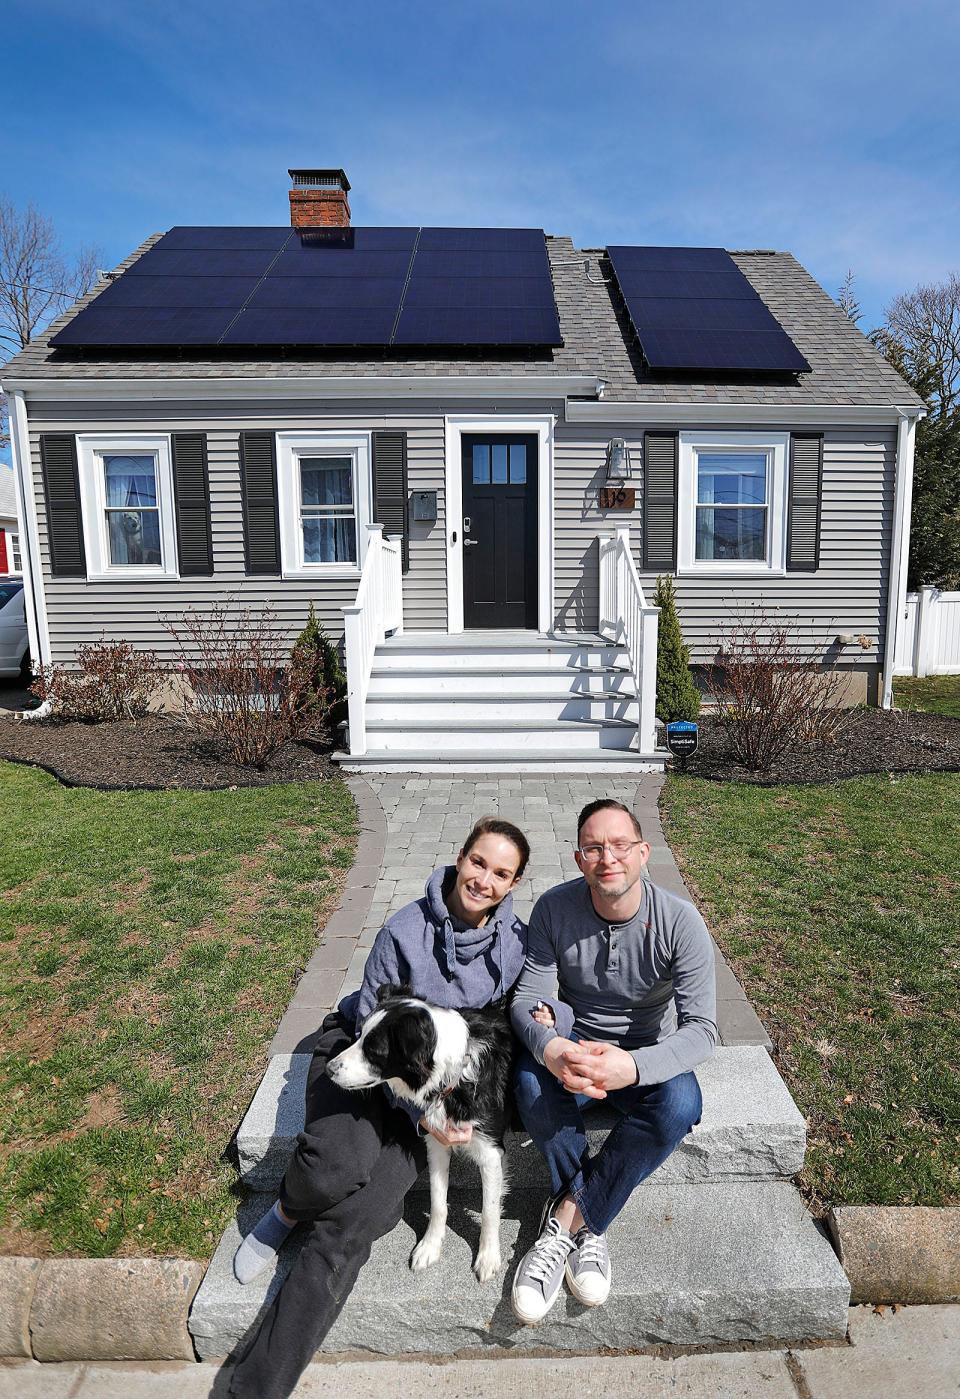 Ariel Campbell, Jack Paleczny and their border collie, Shadow, moved from Boston to a house in Quincy, where the couple hired landscapers to spruce up their property. Tuesday, March 29, 2022.